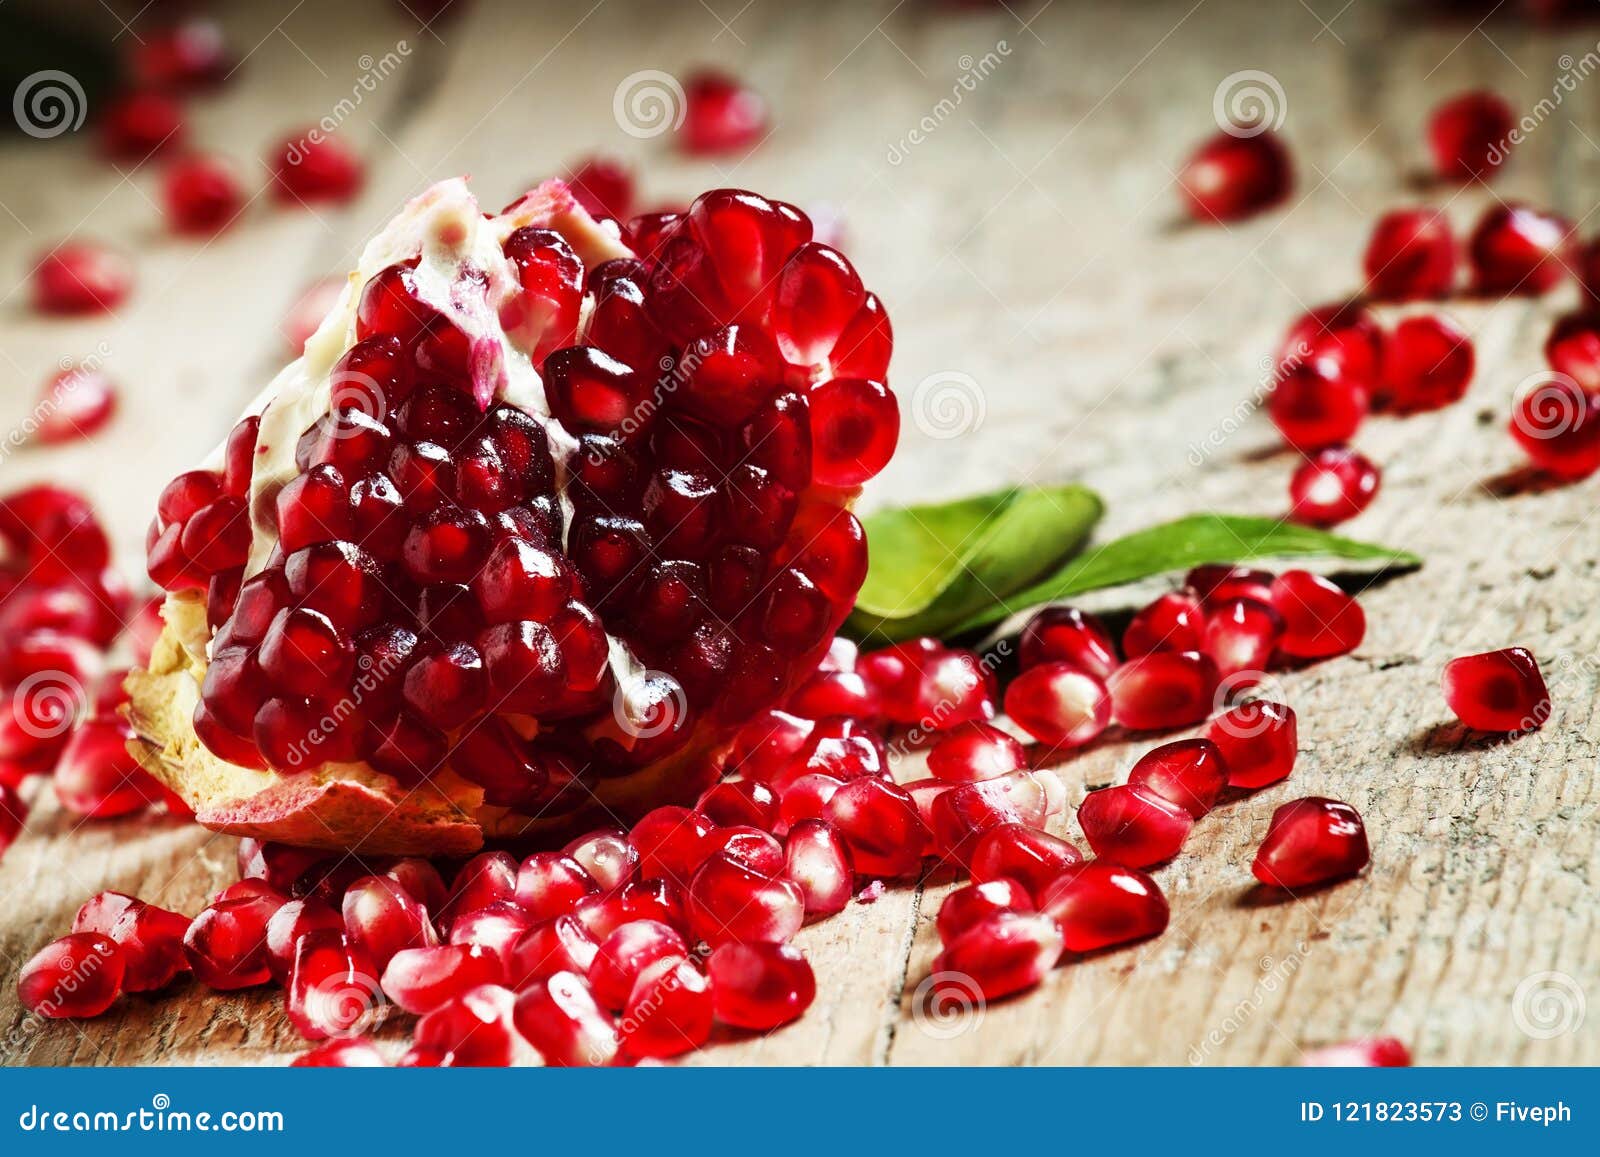 fresh peeled pomegranates with ruby red beans on old wooden table, selective focus